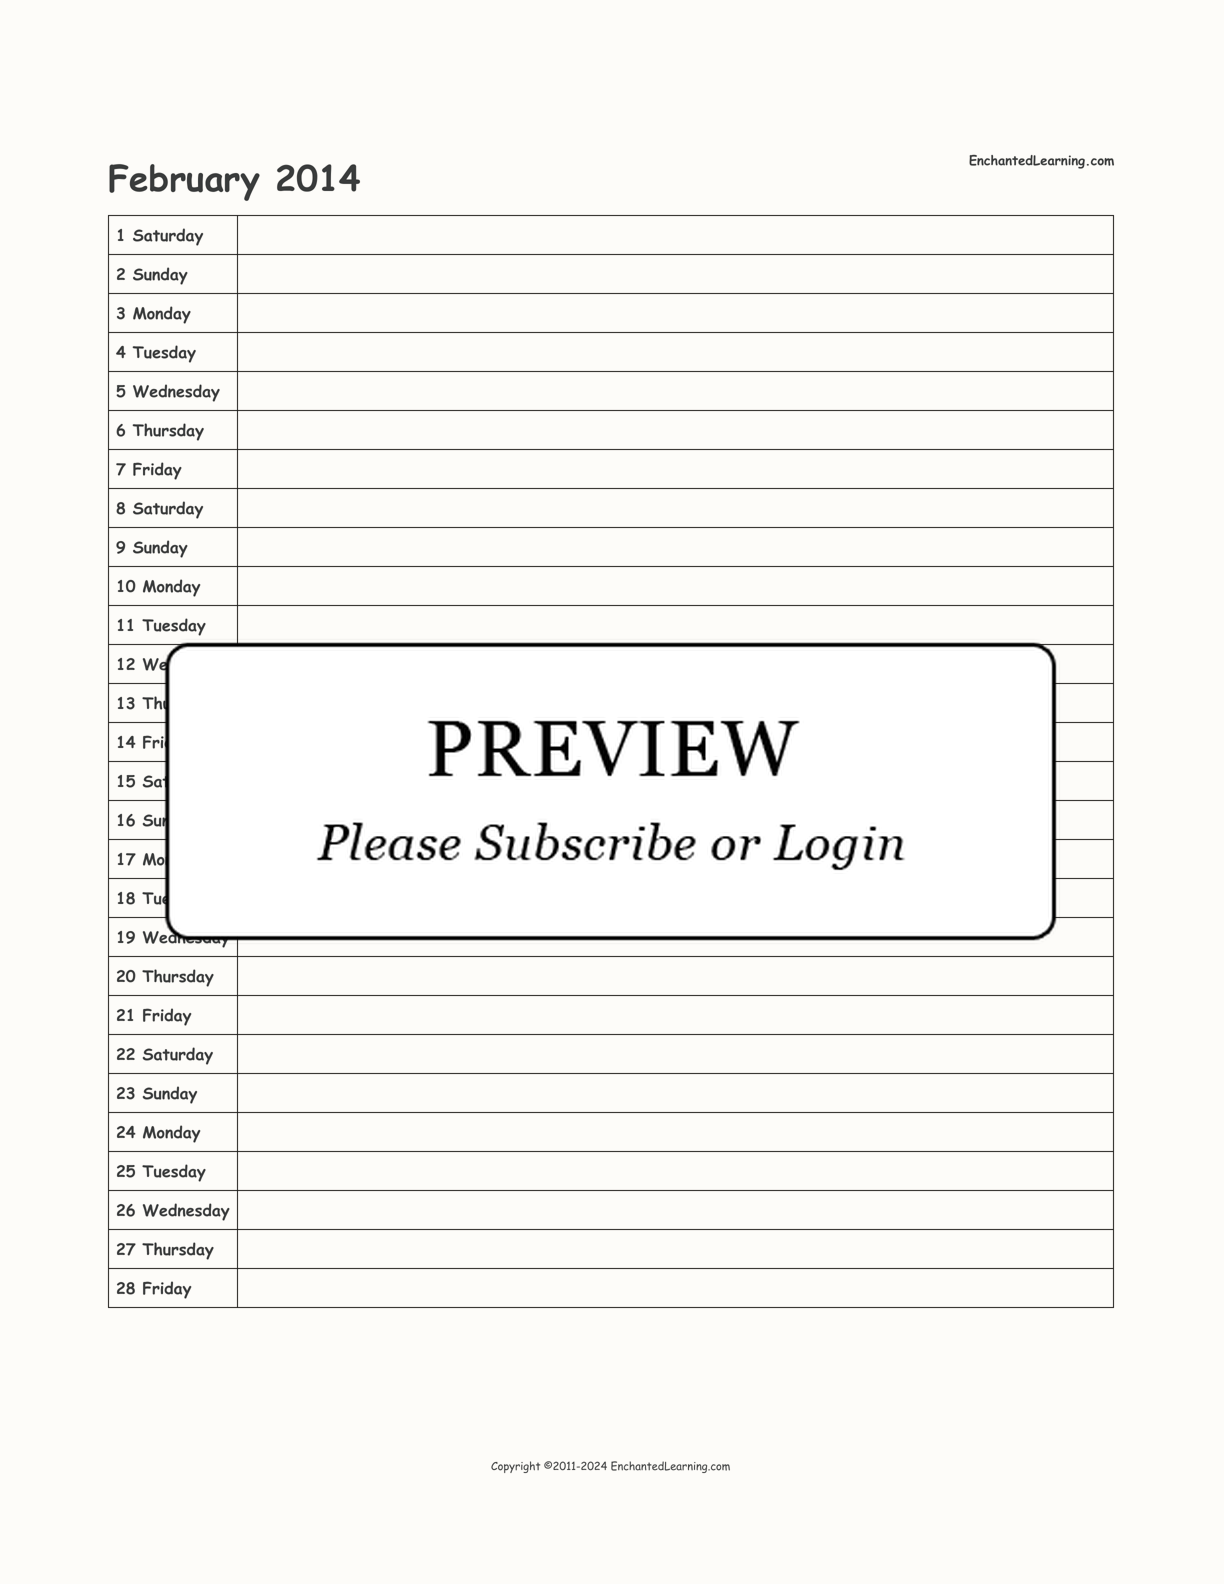 2014 Scheduling Calendar interactive printout page 2